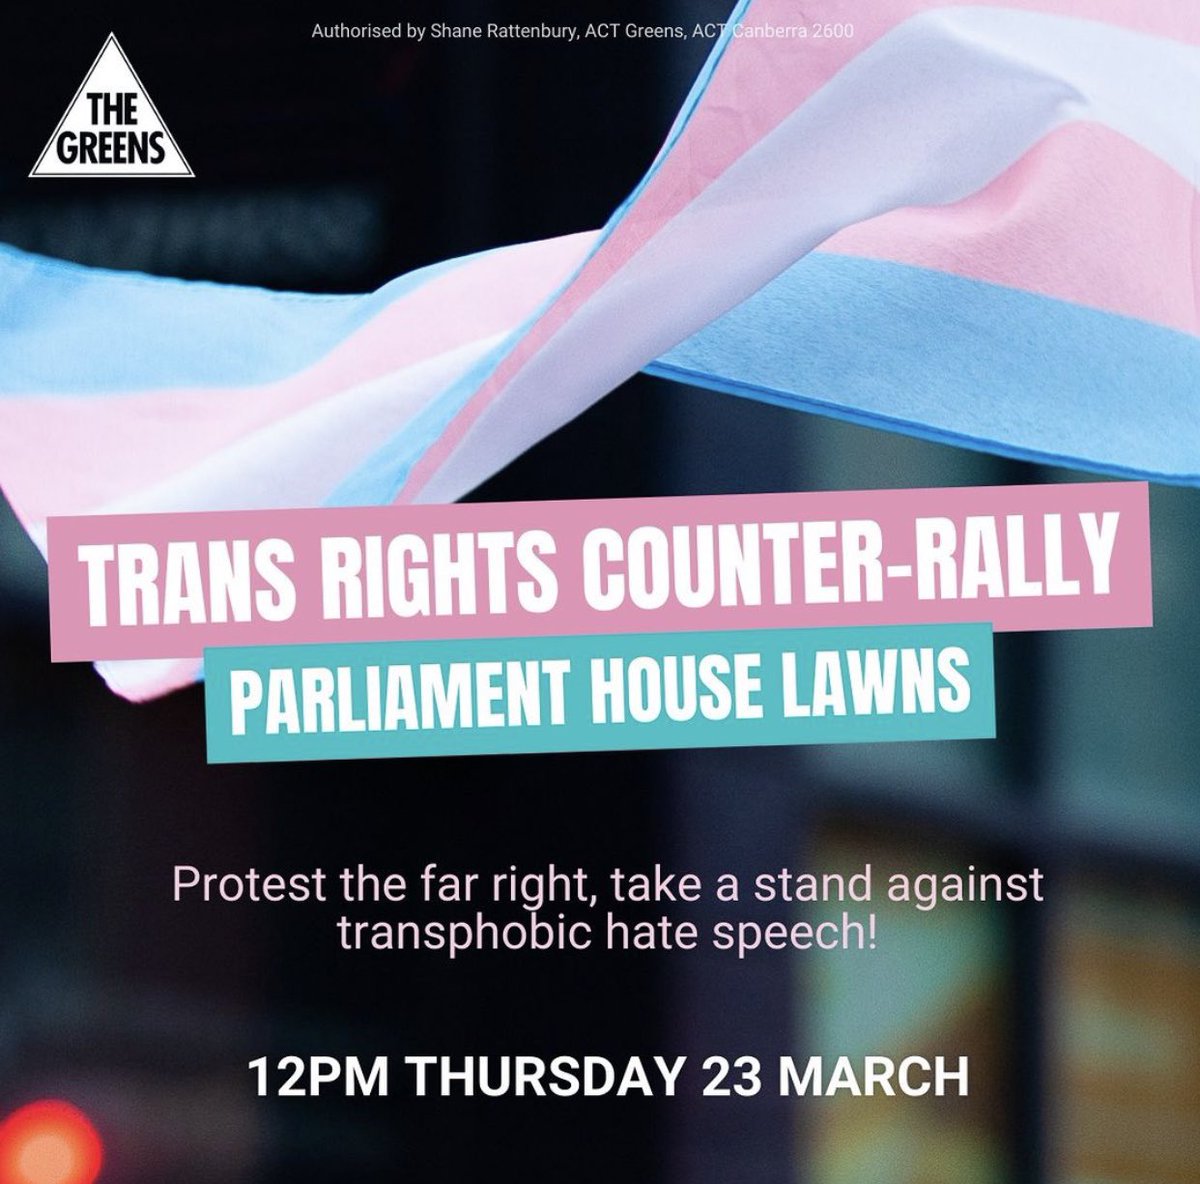 Johnathan Davis MLA (He/Him): Canberra rejects transphobia. 
Canberra rejects hate speech. 
Can…